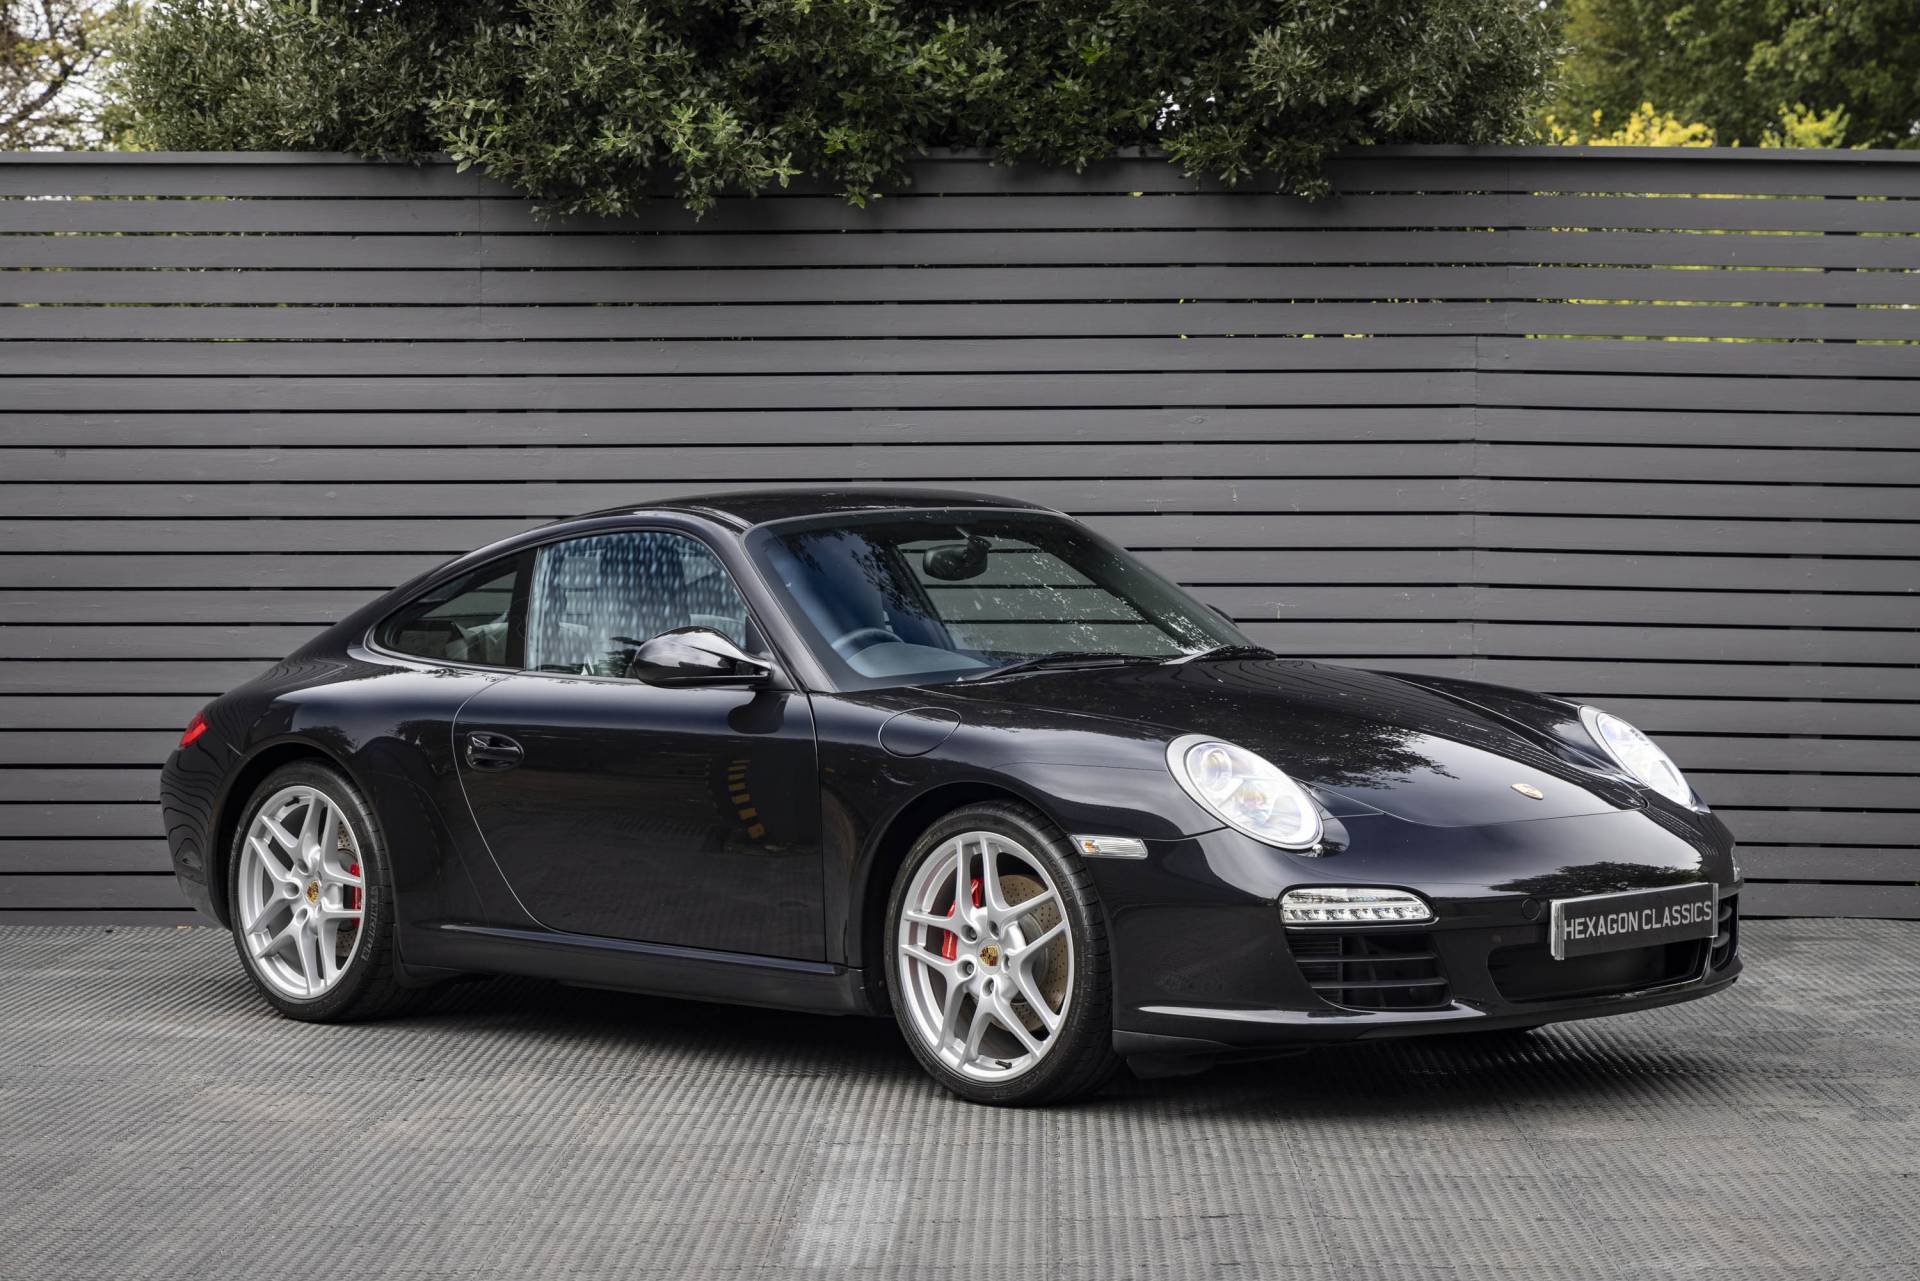 For Sale: Porsche 911 Carrera S (2008) offered for GBP 57,995